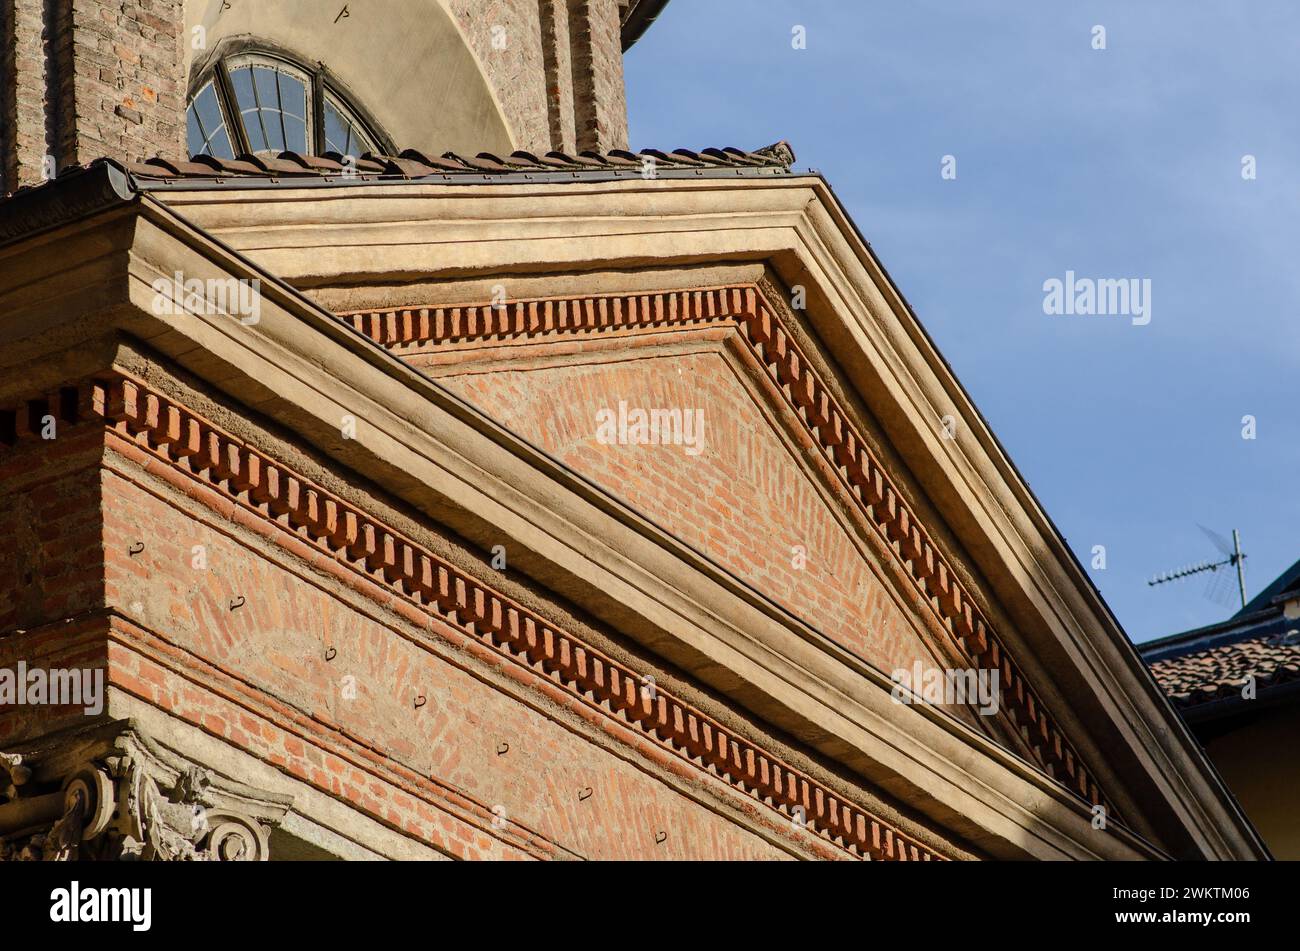 particular architecture, gable facade of a neo-classical building with exposed brick, with cornice, shelves and decorations. facade historic Stock Photo